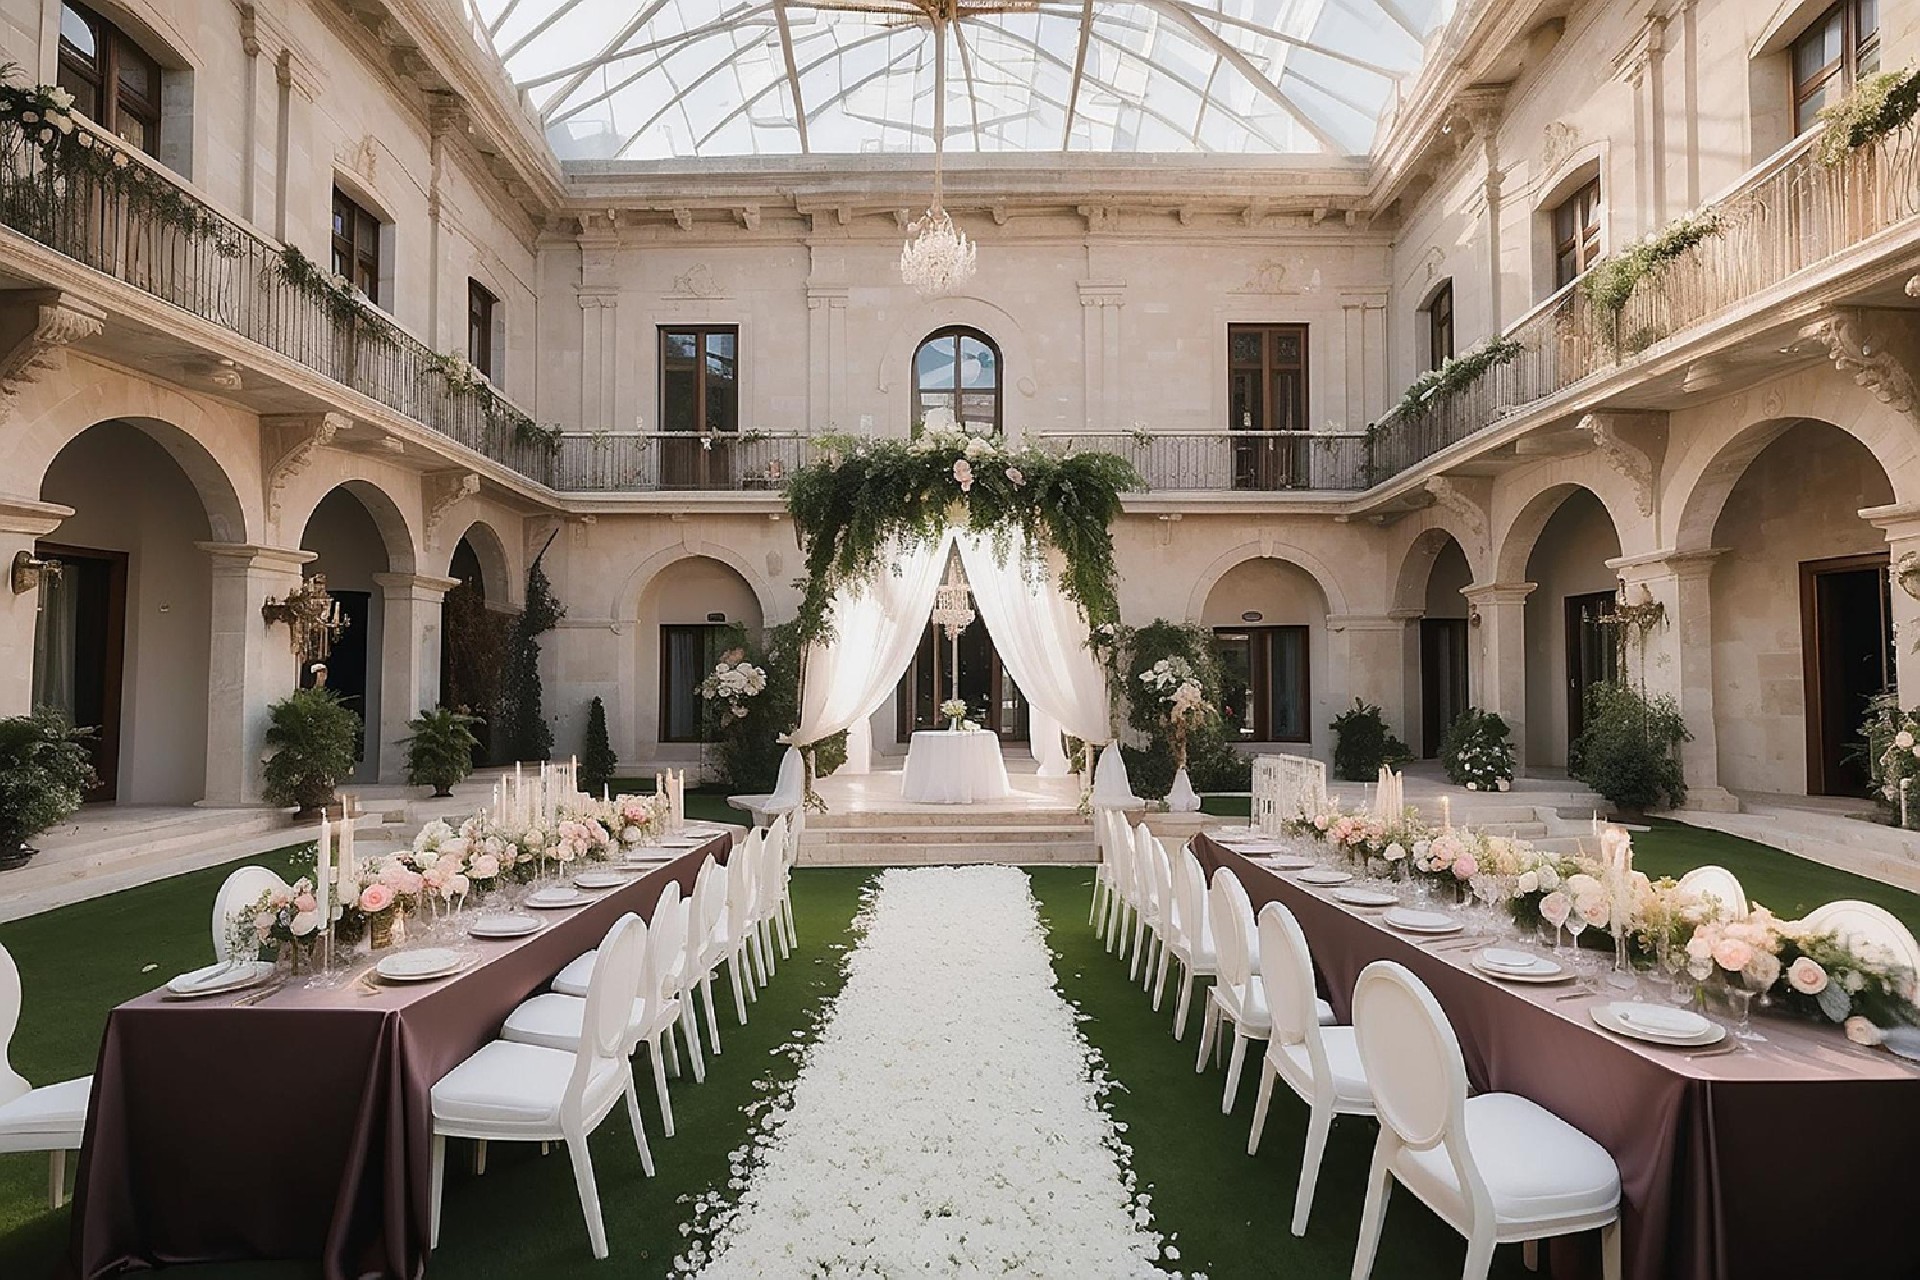 Unique Wedding Venues That Will Wow Your Guests